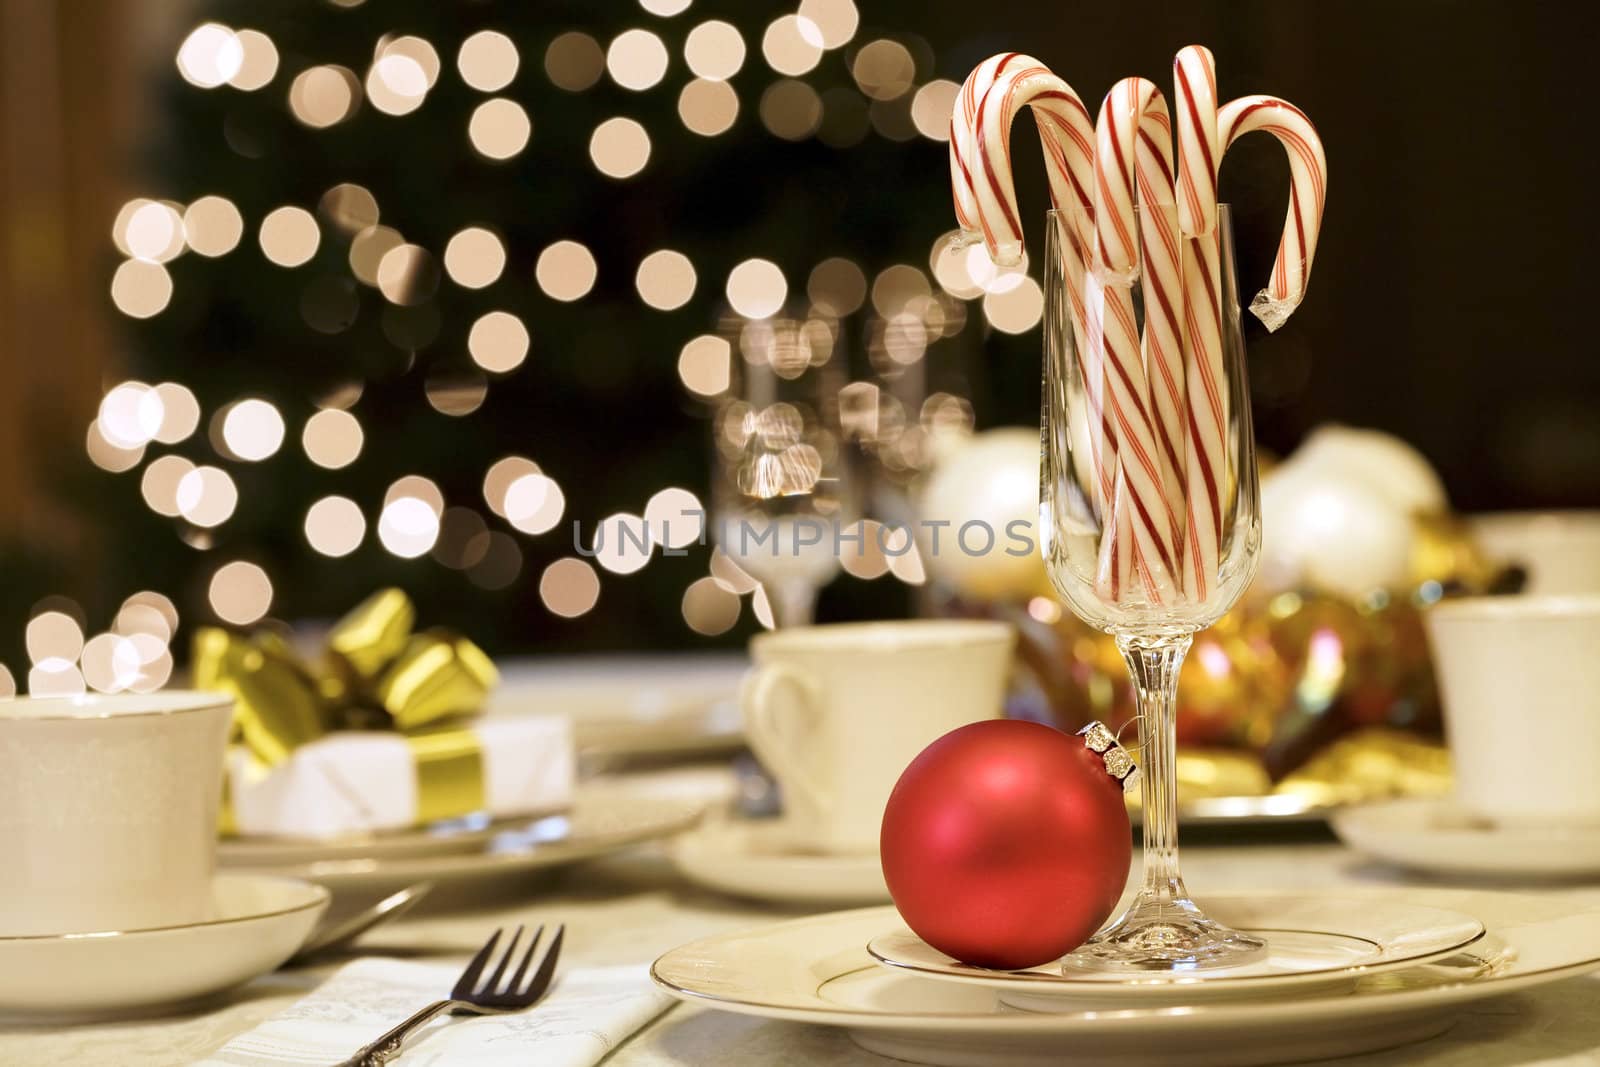 Candy canes and ornaments on table by jarenwicklund